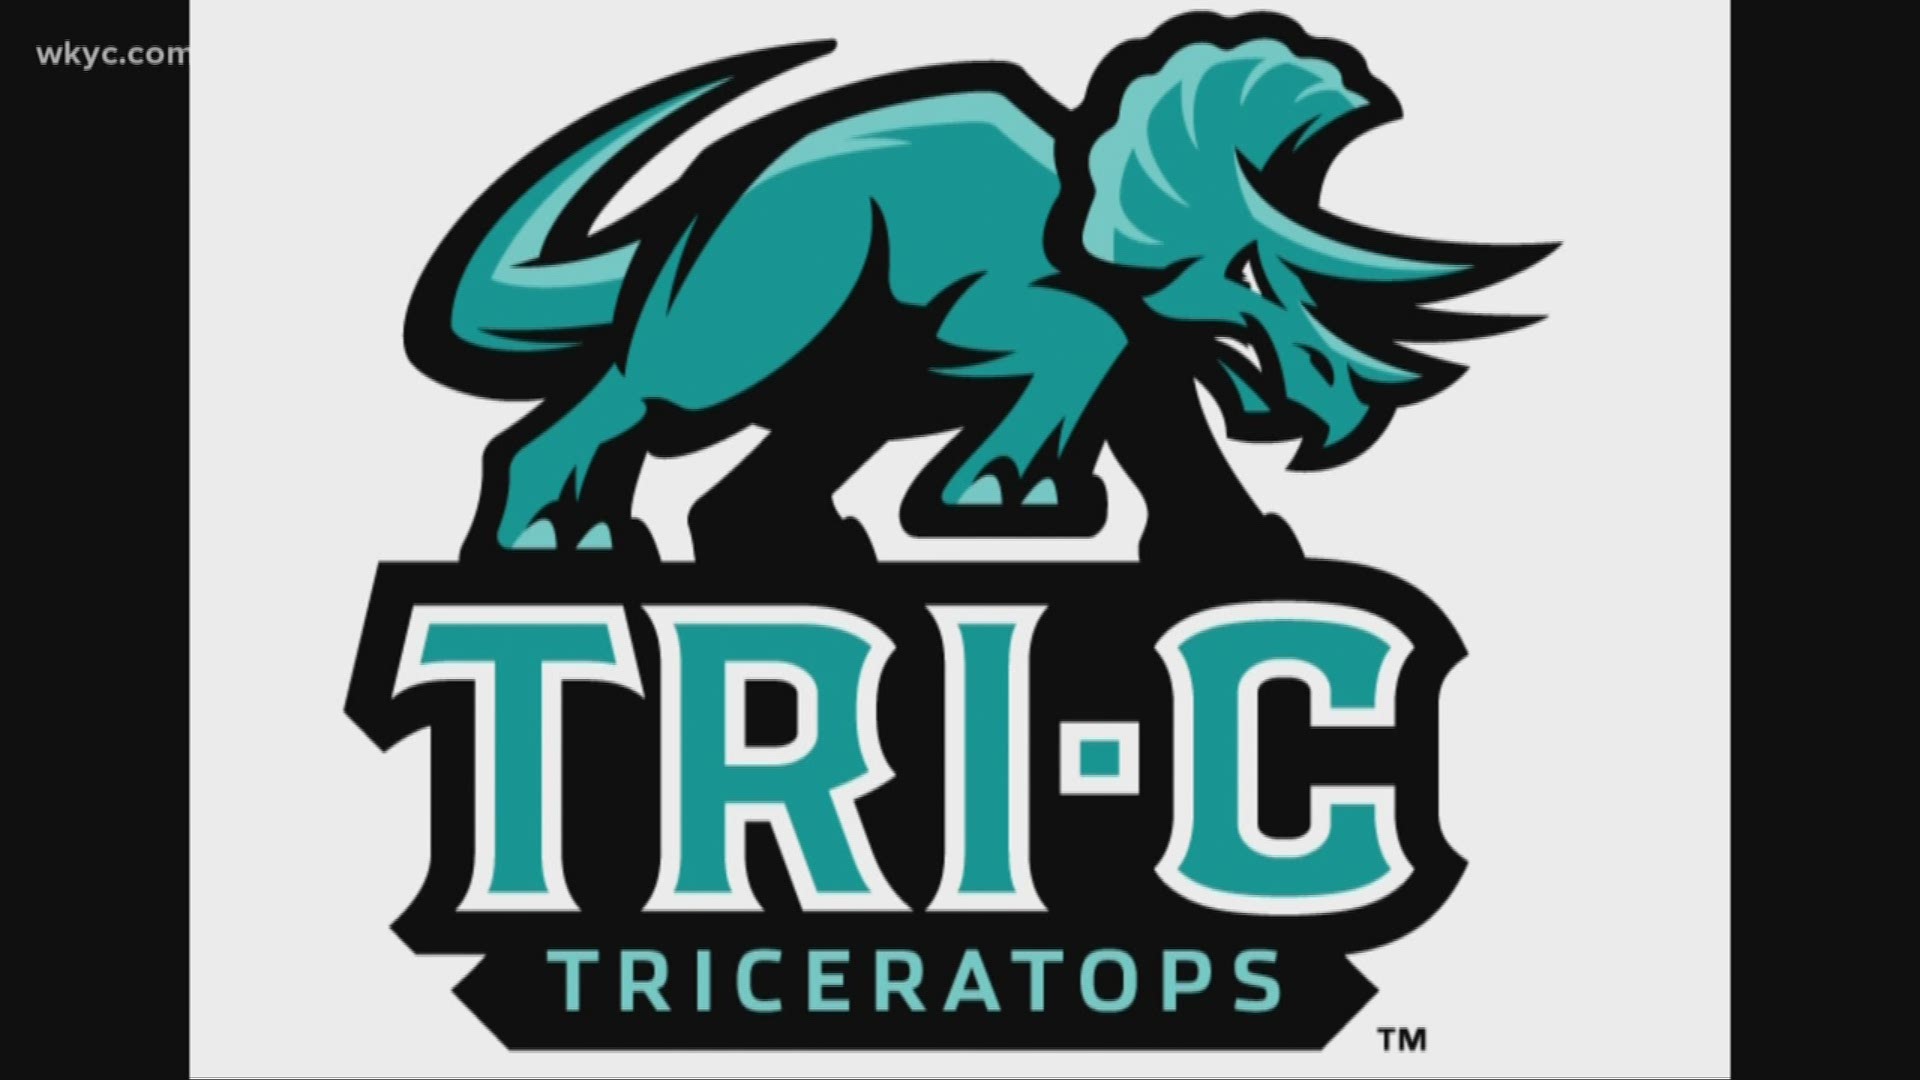 The "formidable yet likable" logo feature's the school's trademark teal coloring.